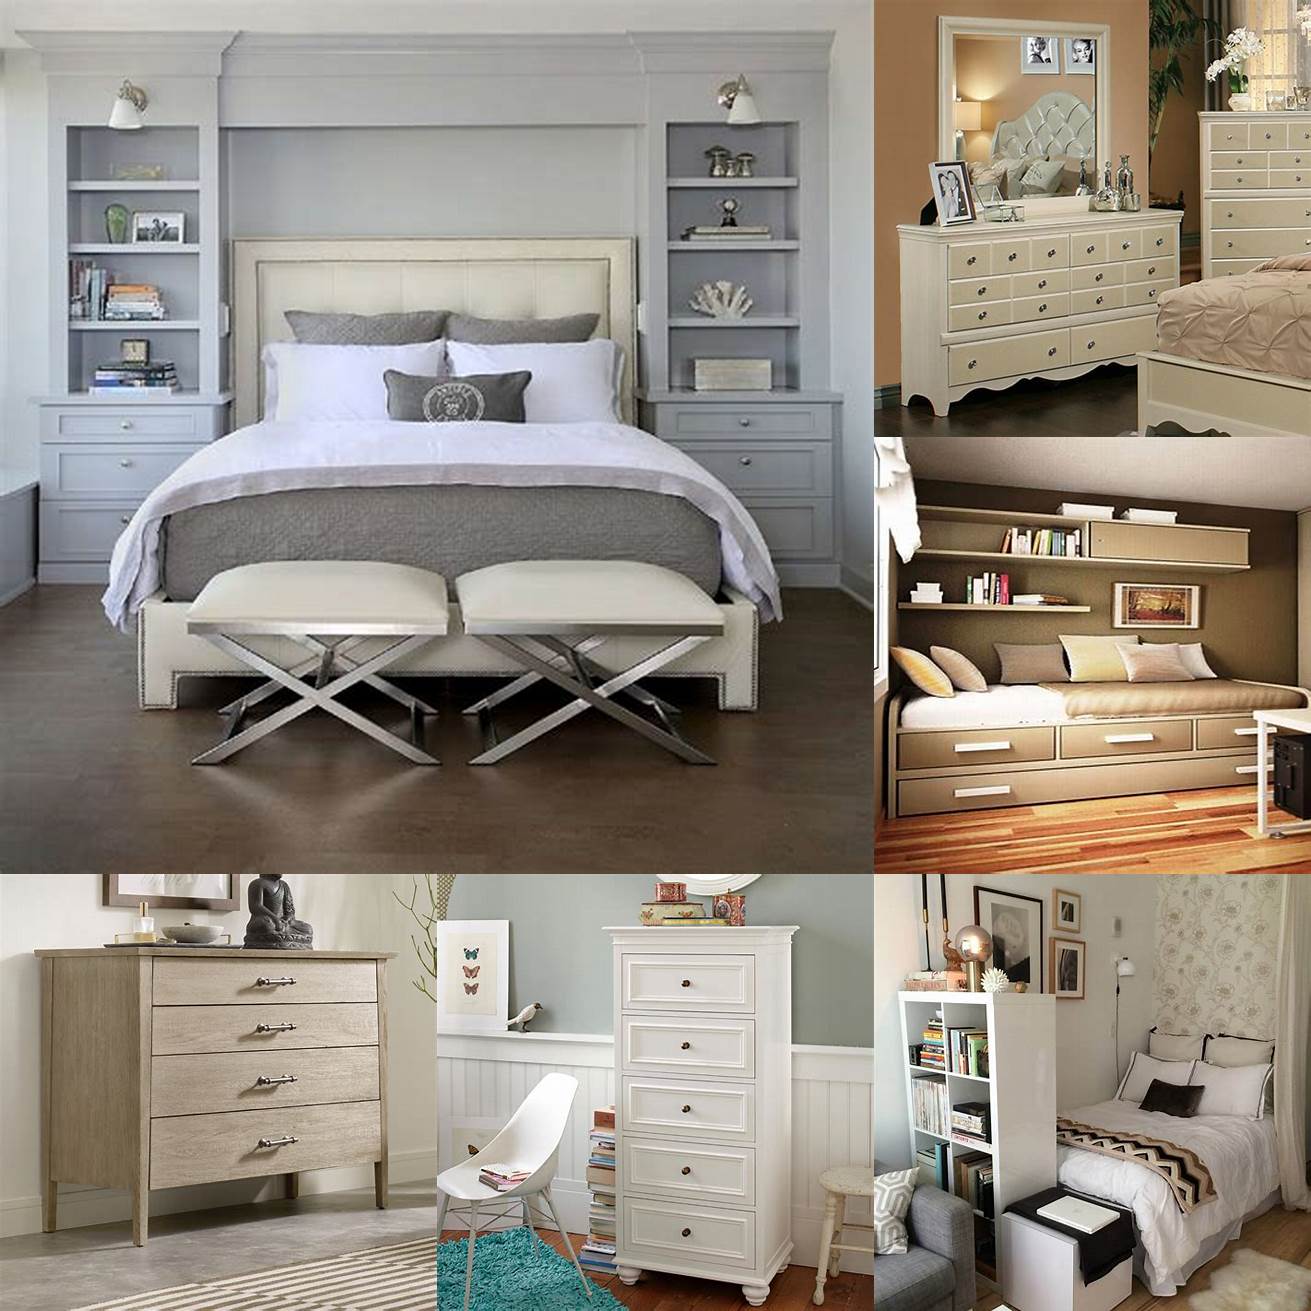 A small bedroom dresser set designed for compact spaces